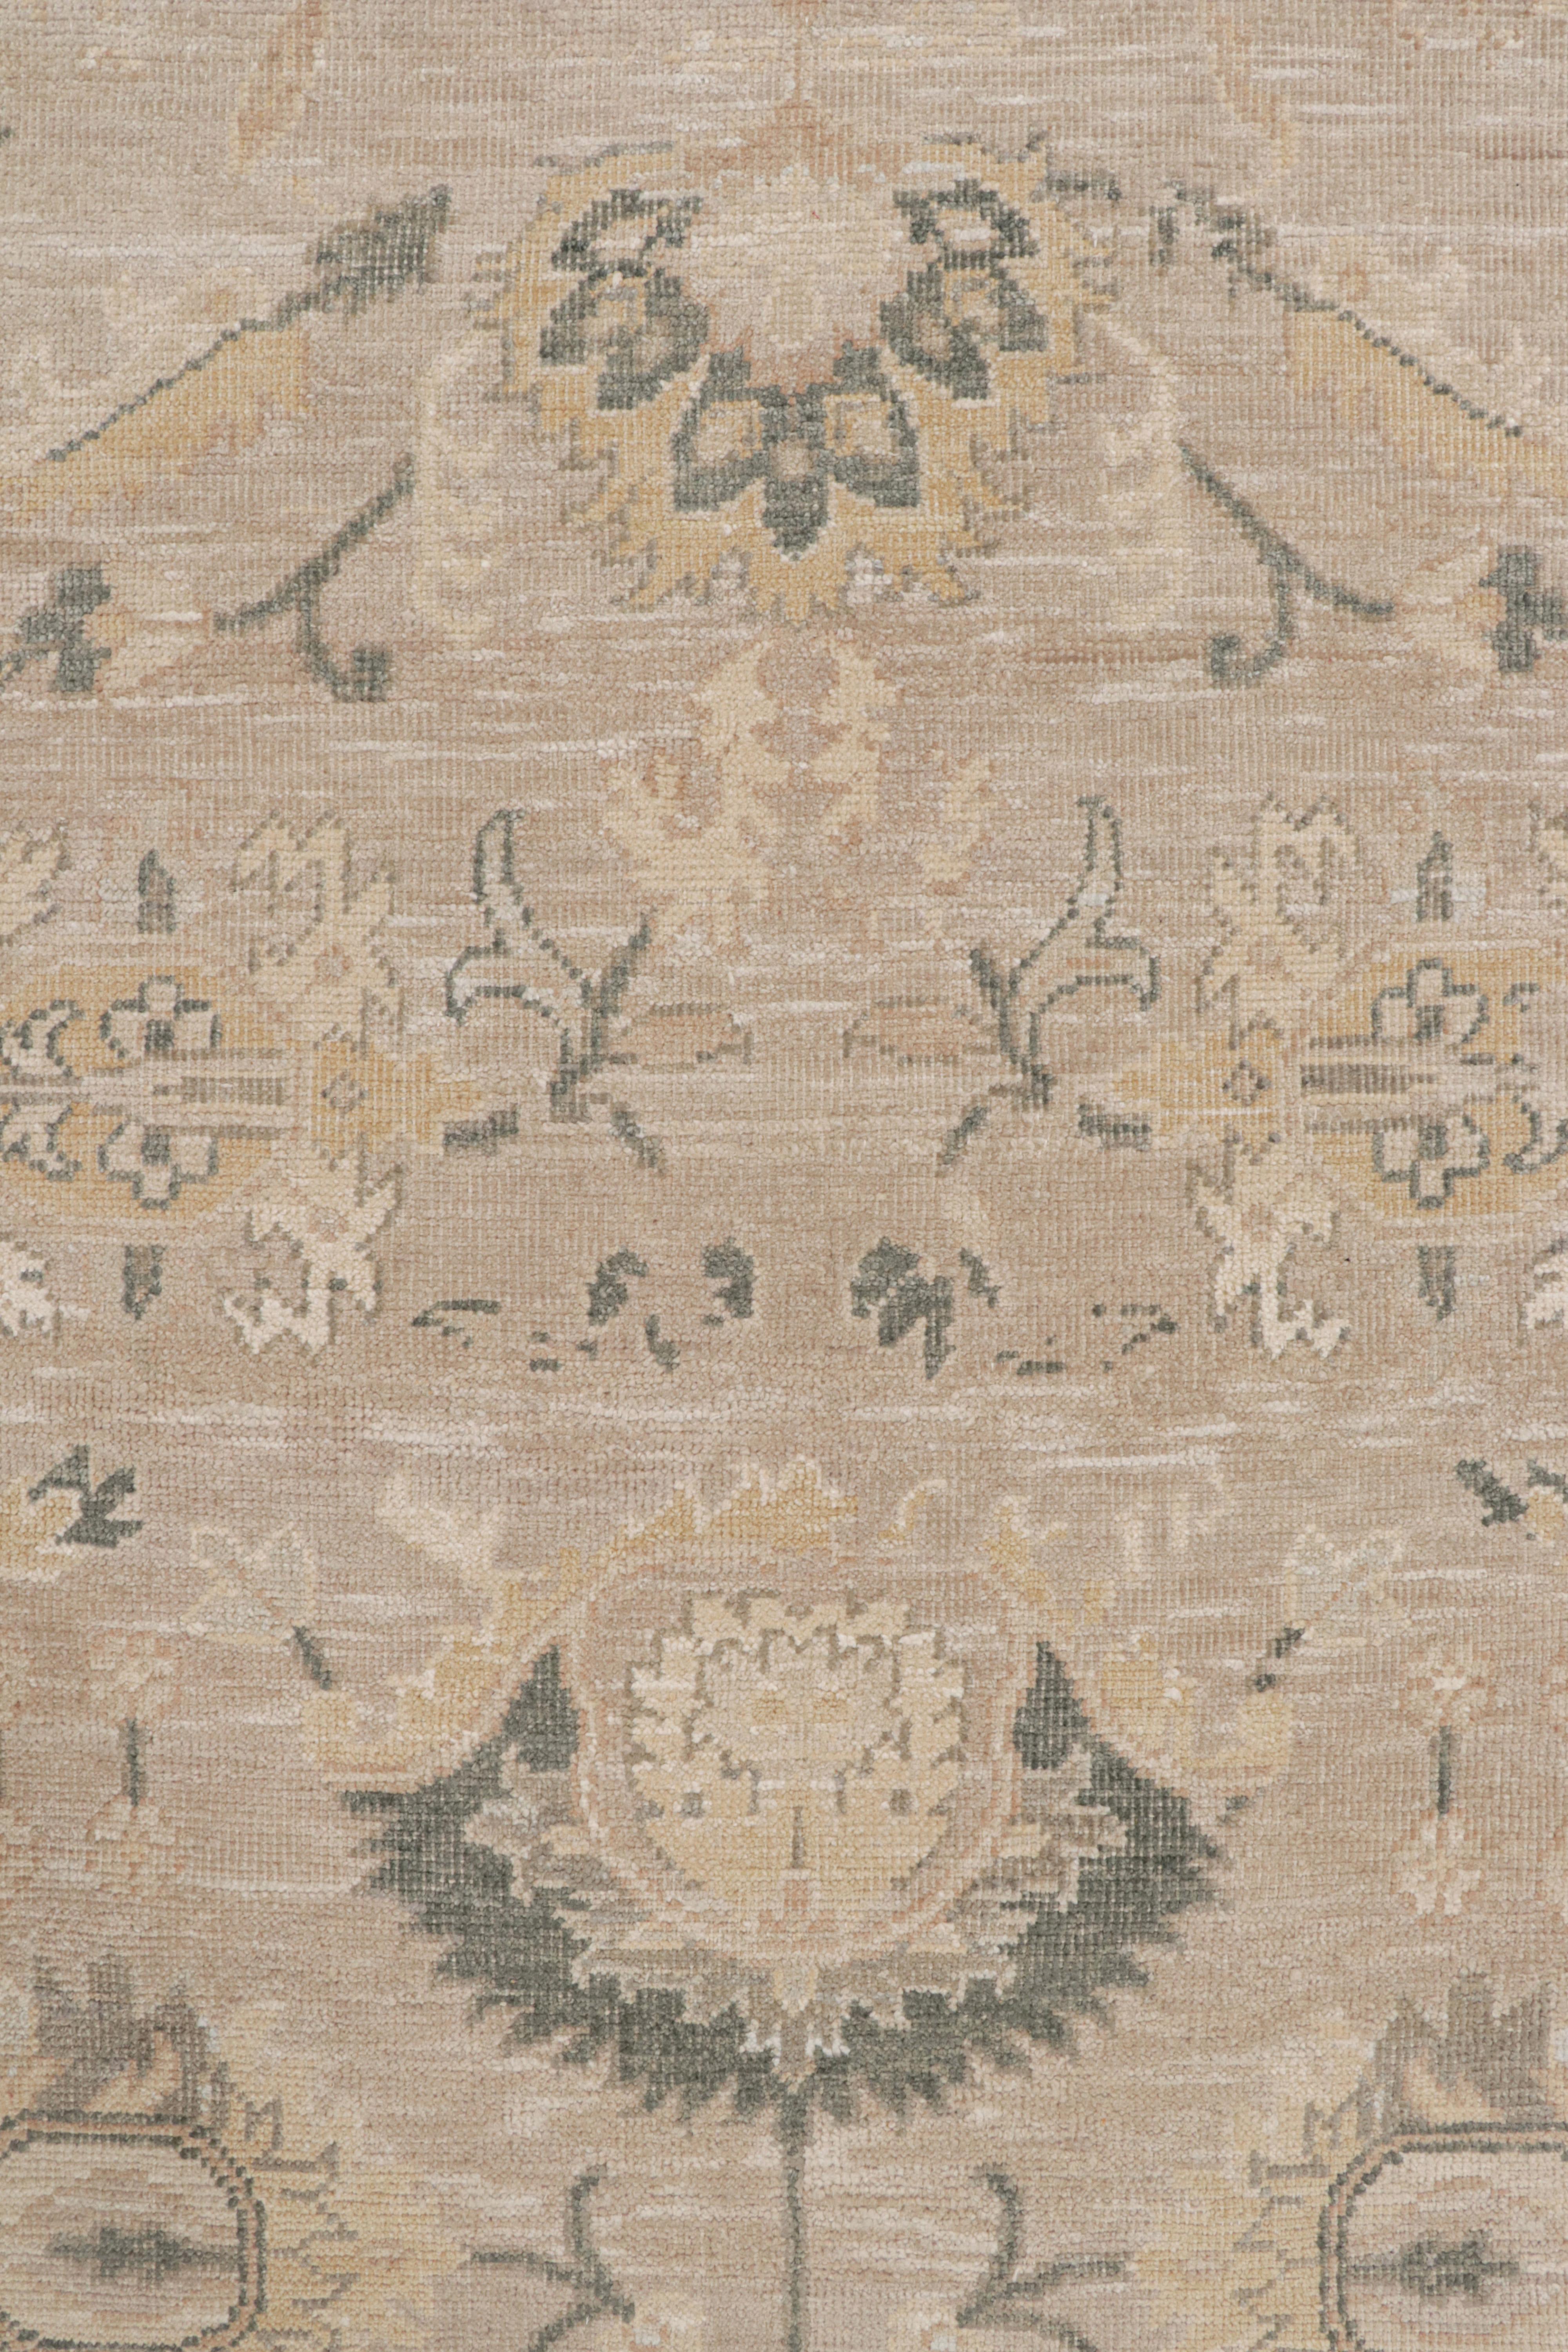 Contemporary Rug & Kilim’s Oushak Style Rug in Beige, Gray & Gold Geometric Patterns For Sale